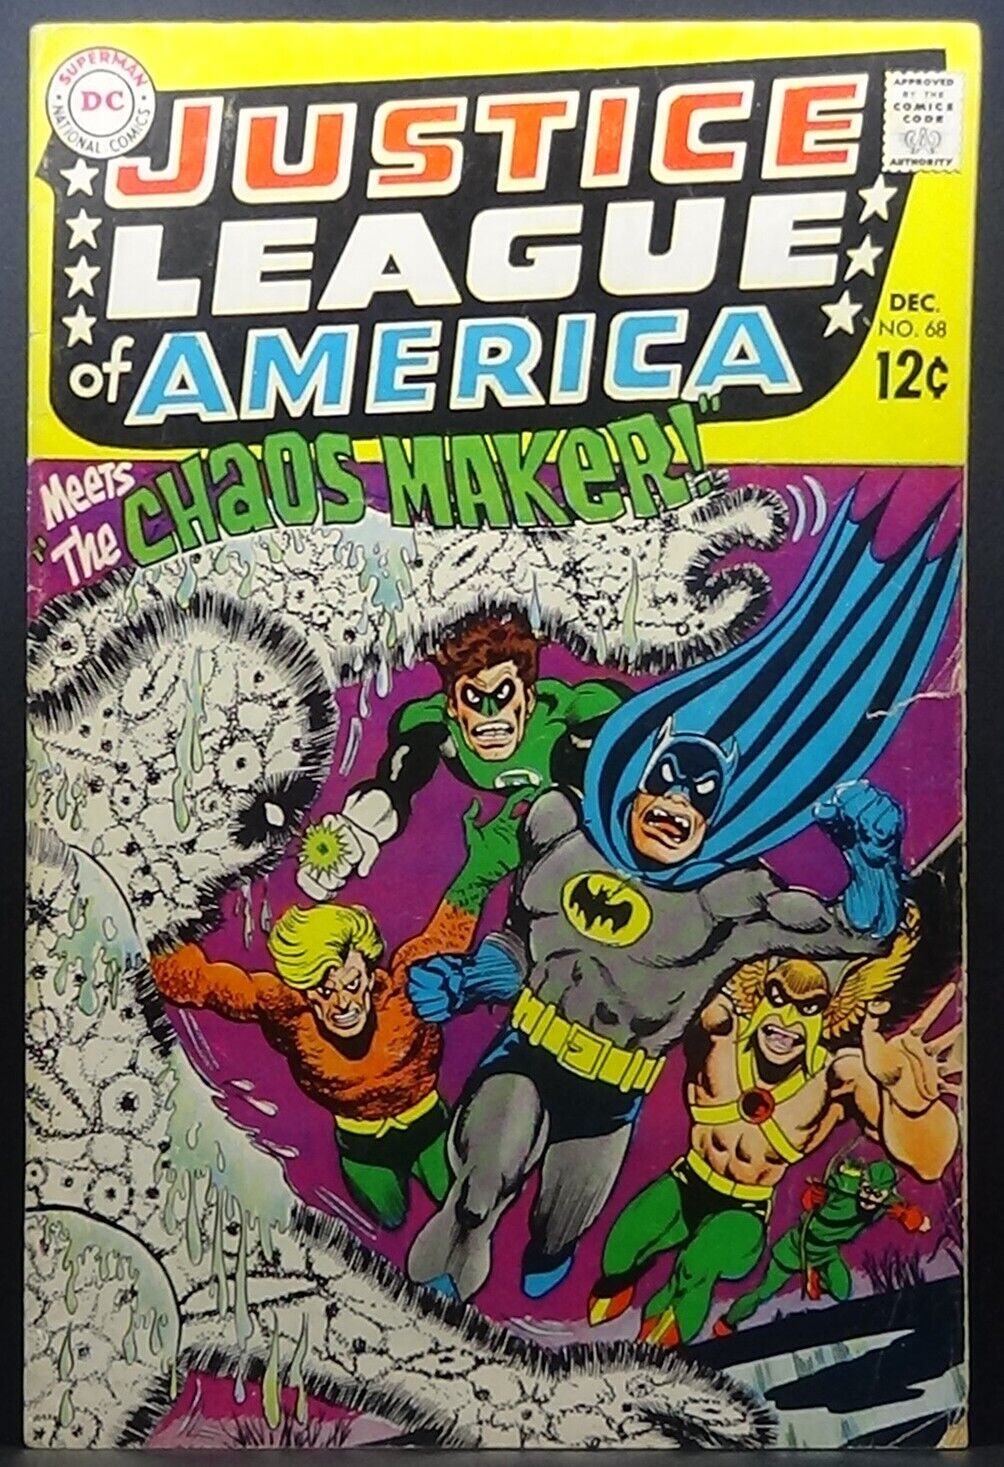 JUSTICE LEAGUE OF AMERICA #68 4.0 VG CHAOS MAKER 1968 SILVER AGE 